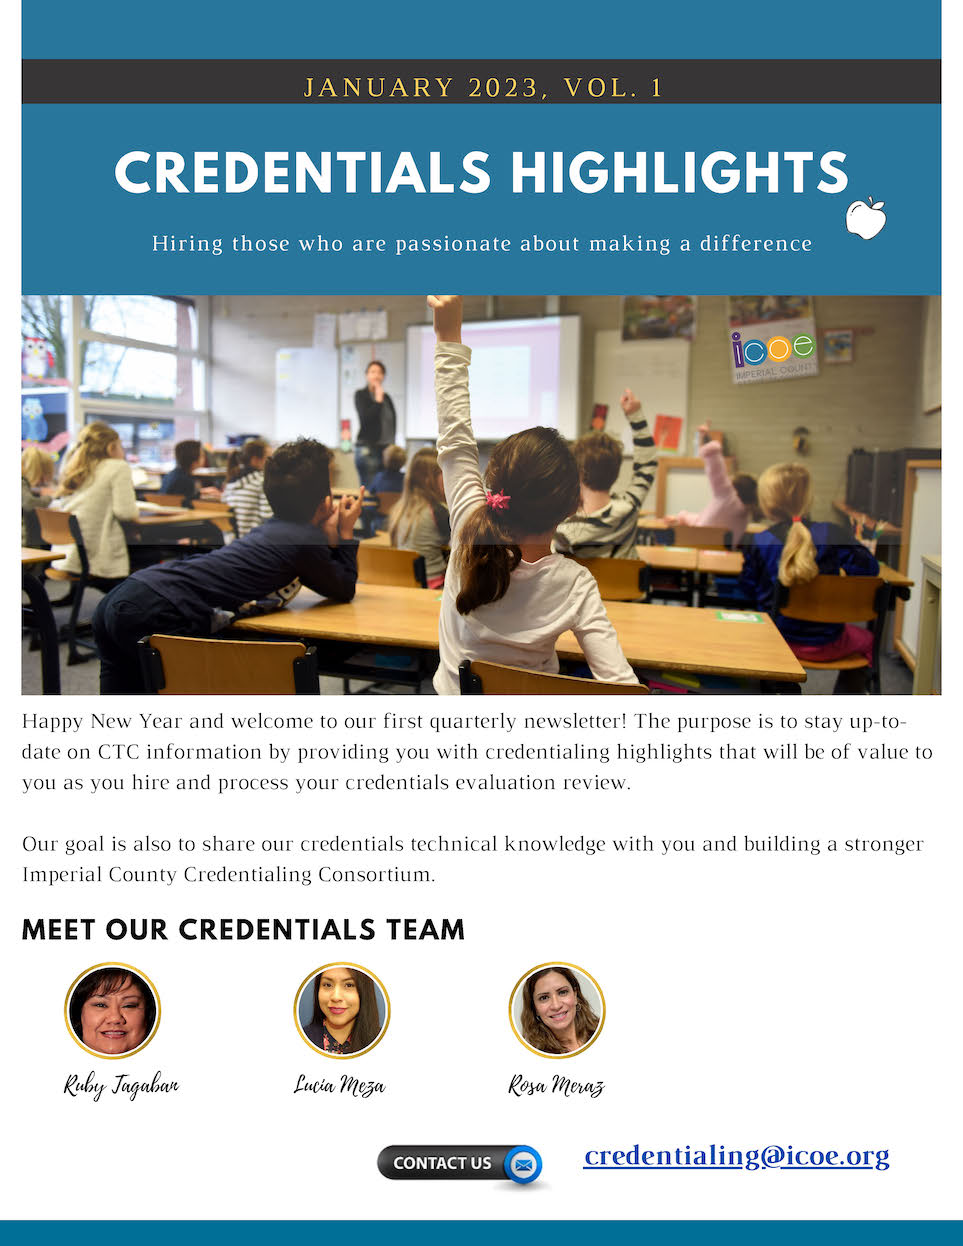 Credentials Highlights Volume 1 - January 2023